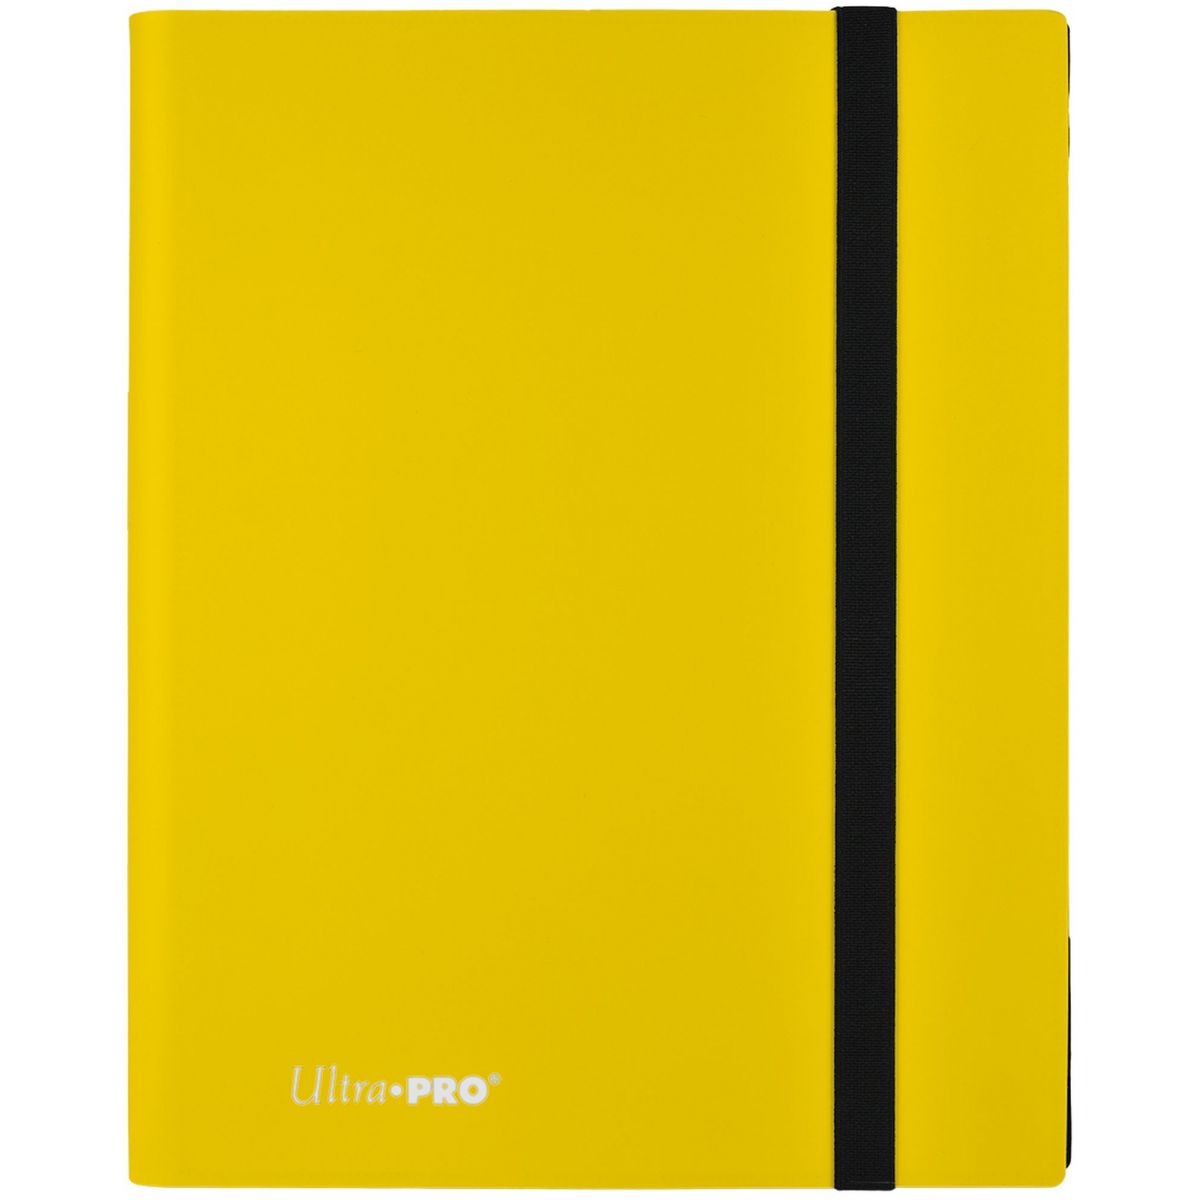 Ultra Pro - Pro Binder - Eclipse - 9 Cases - Yellow / Yellow (360)